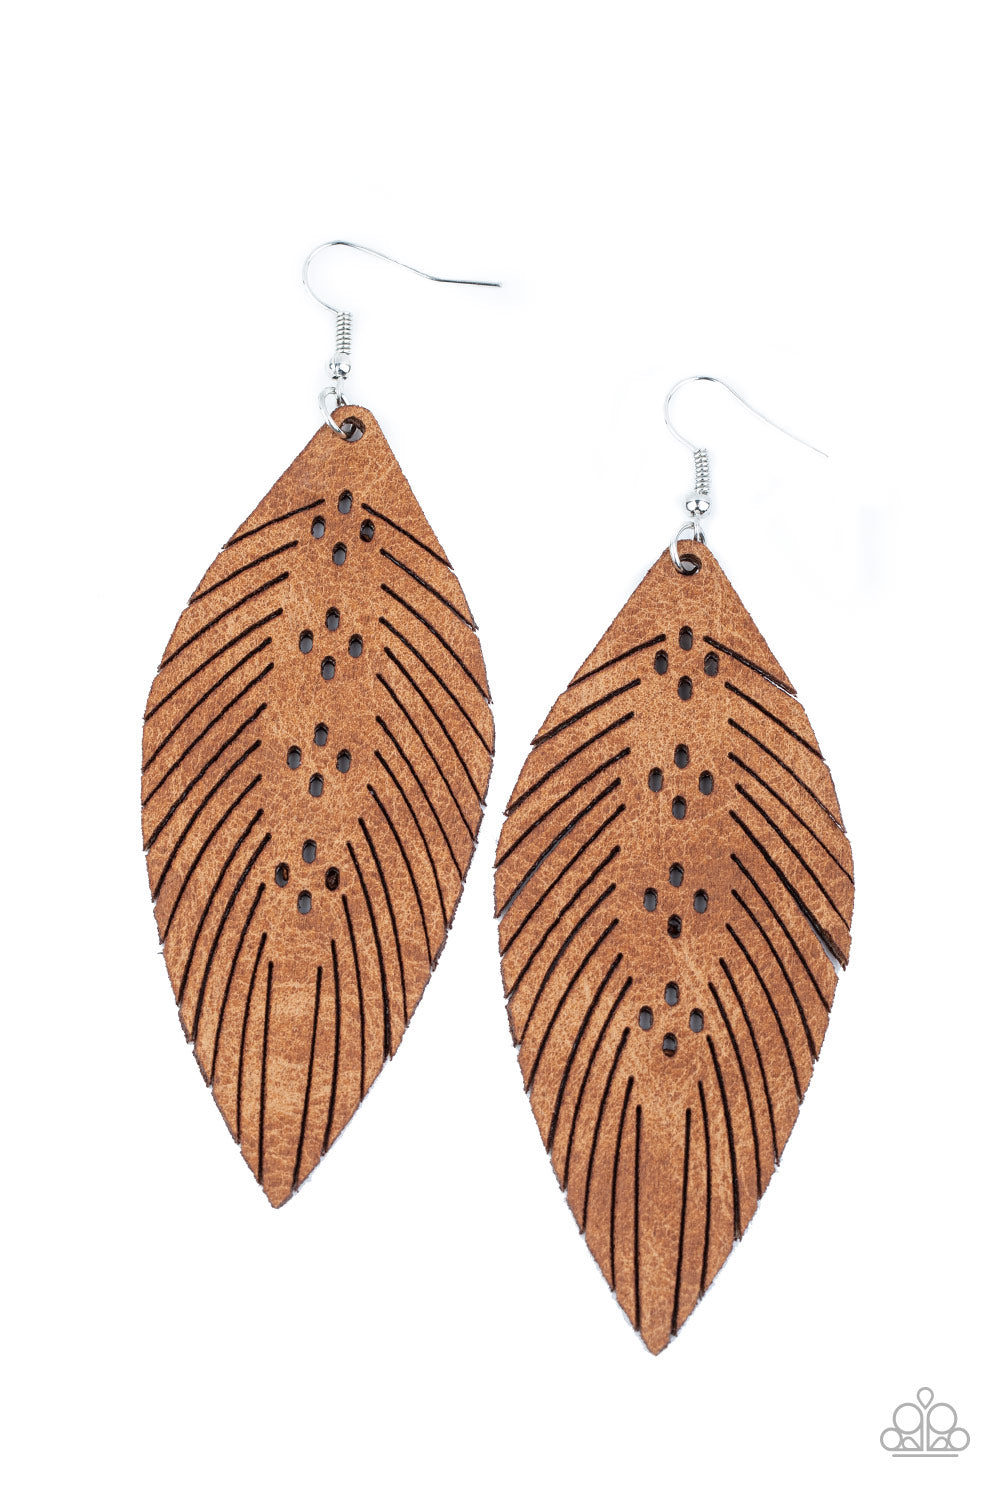 WHEREVER THE WIND TAKES ME - BROWN LEATHER FEATHER EARRINGS